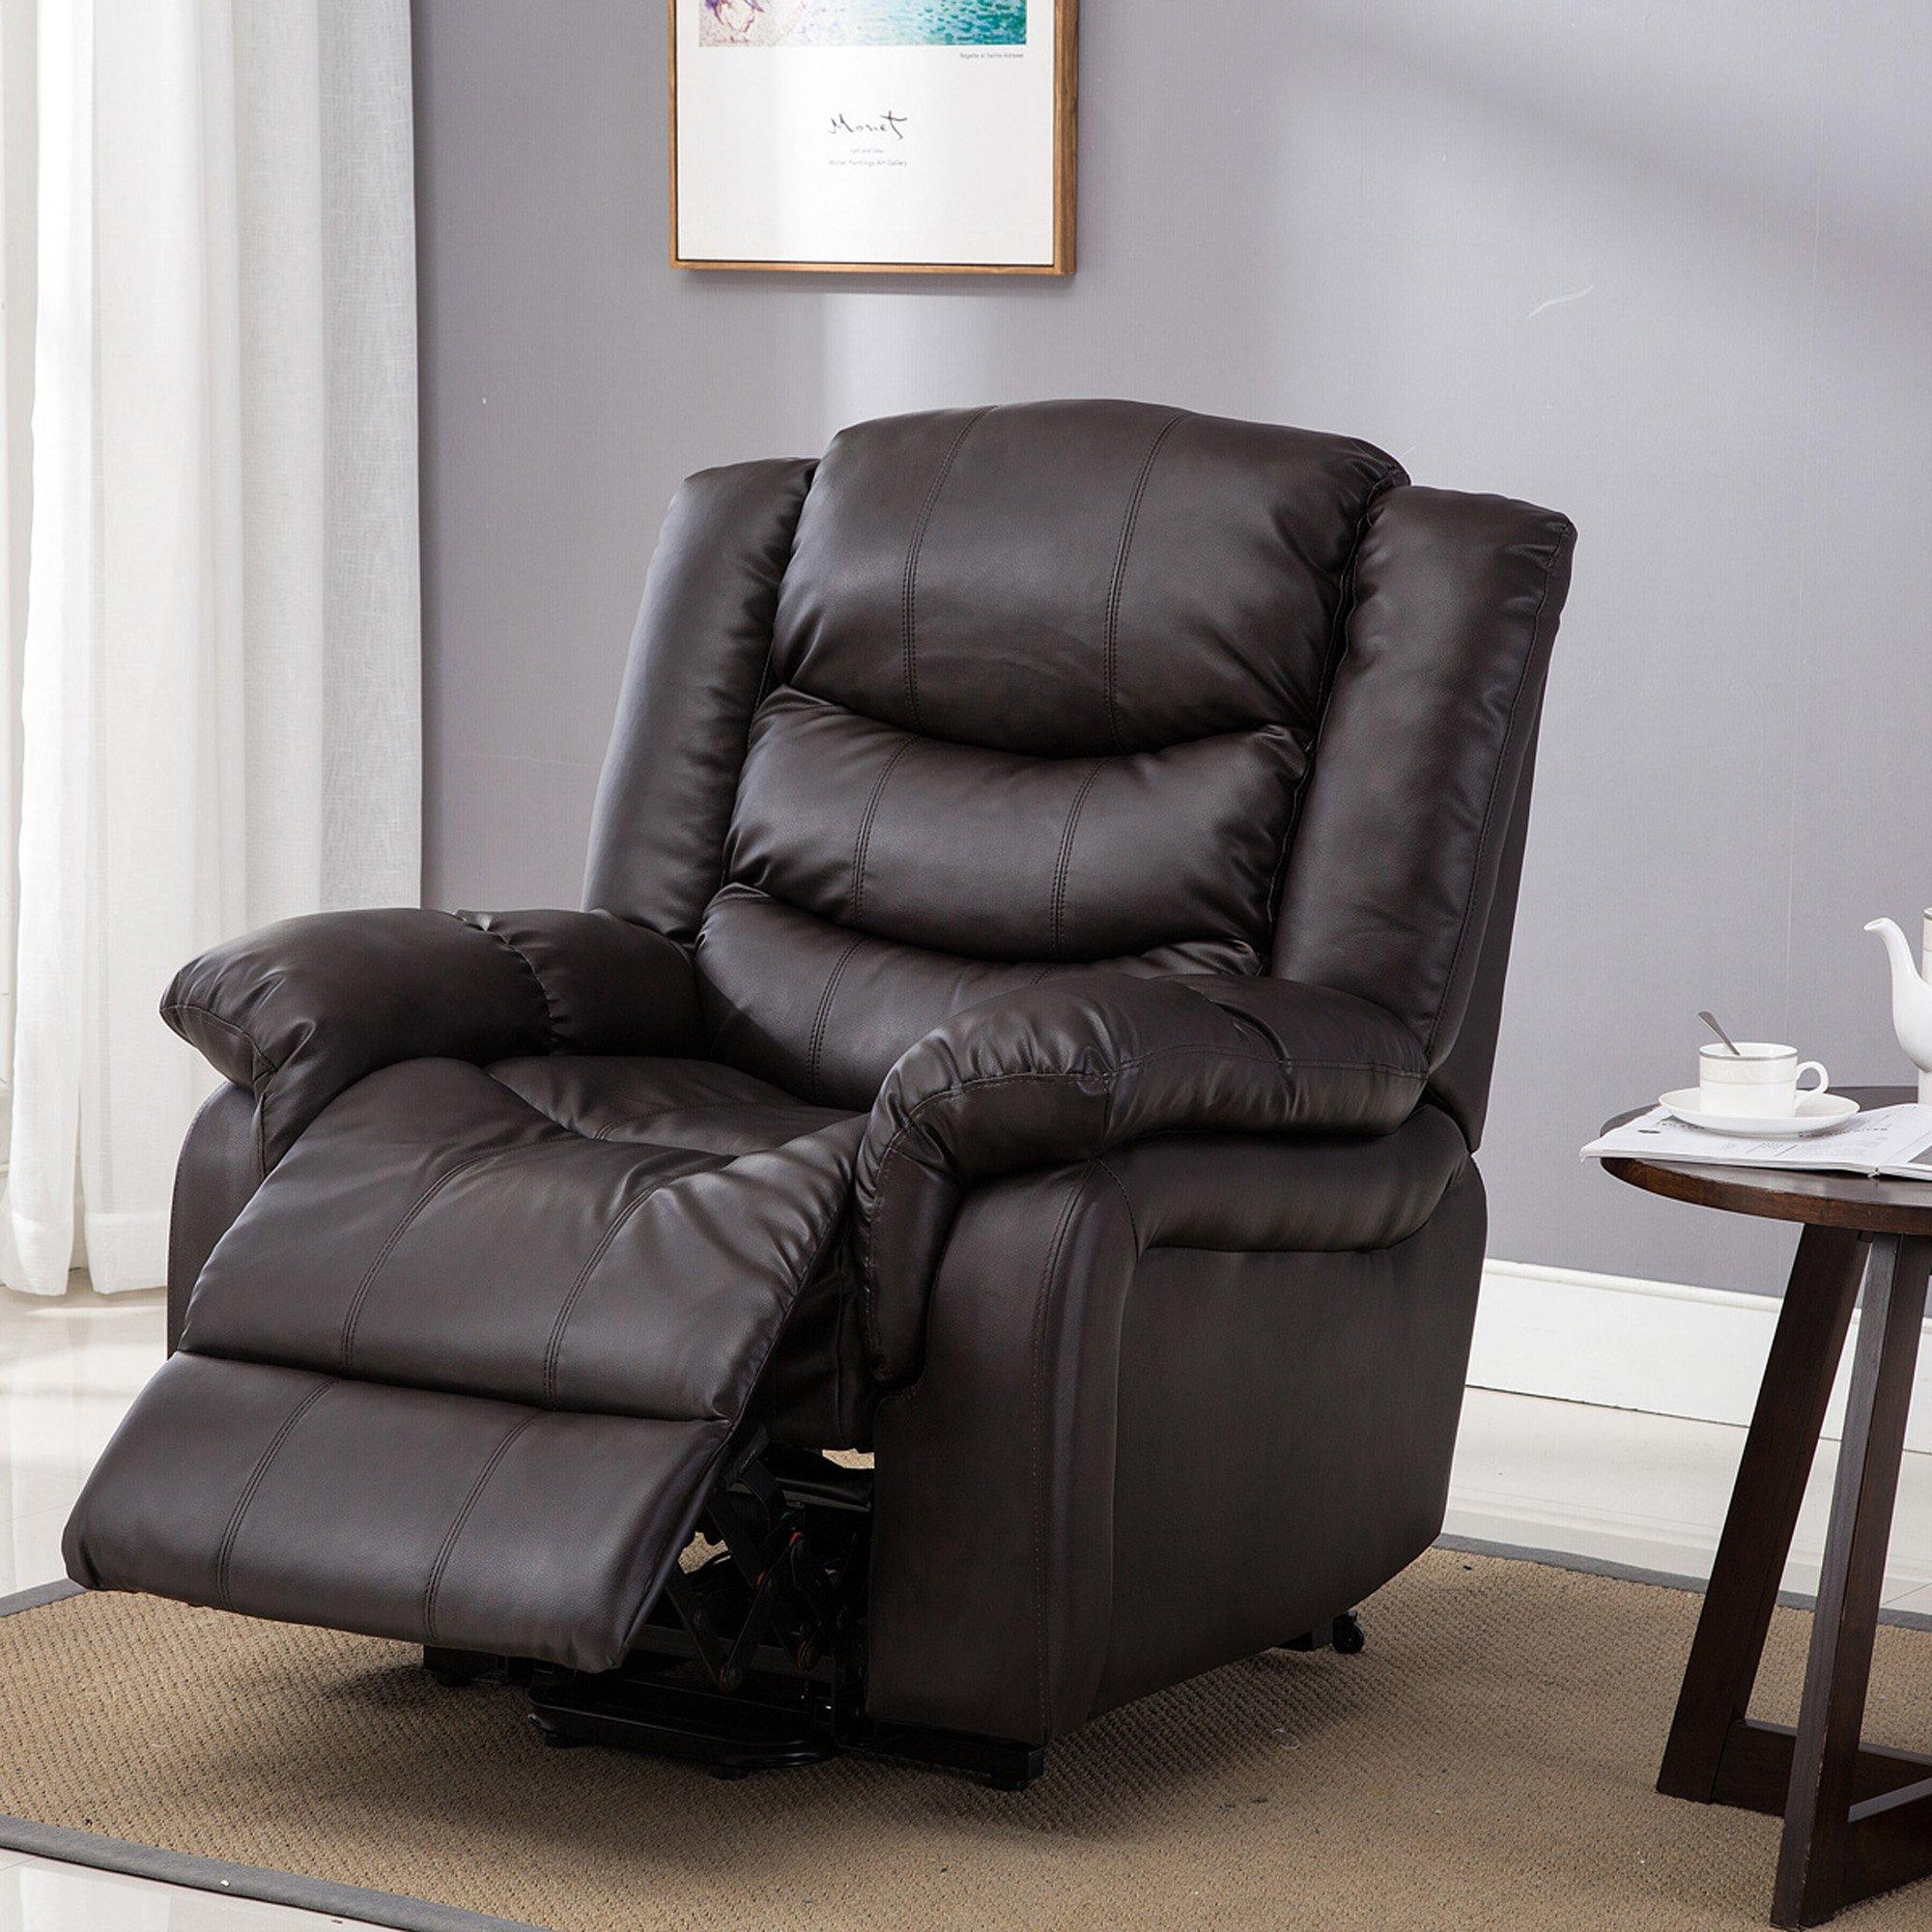 Seattle Electric Automatic Recliner Home Lounge Bonded Leather Chair